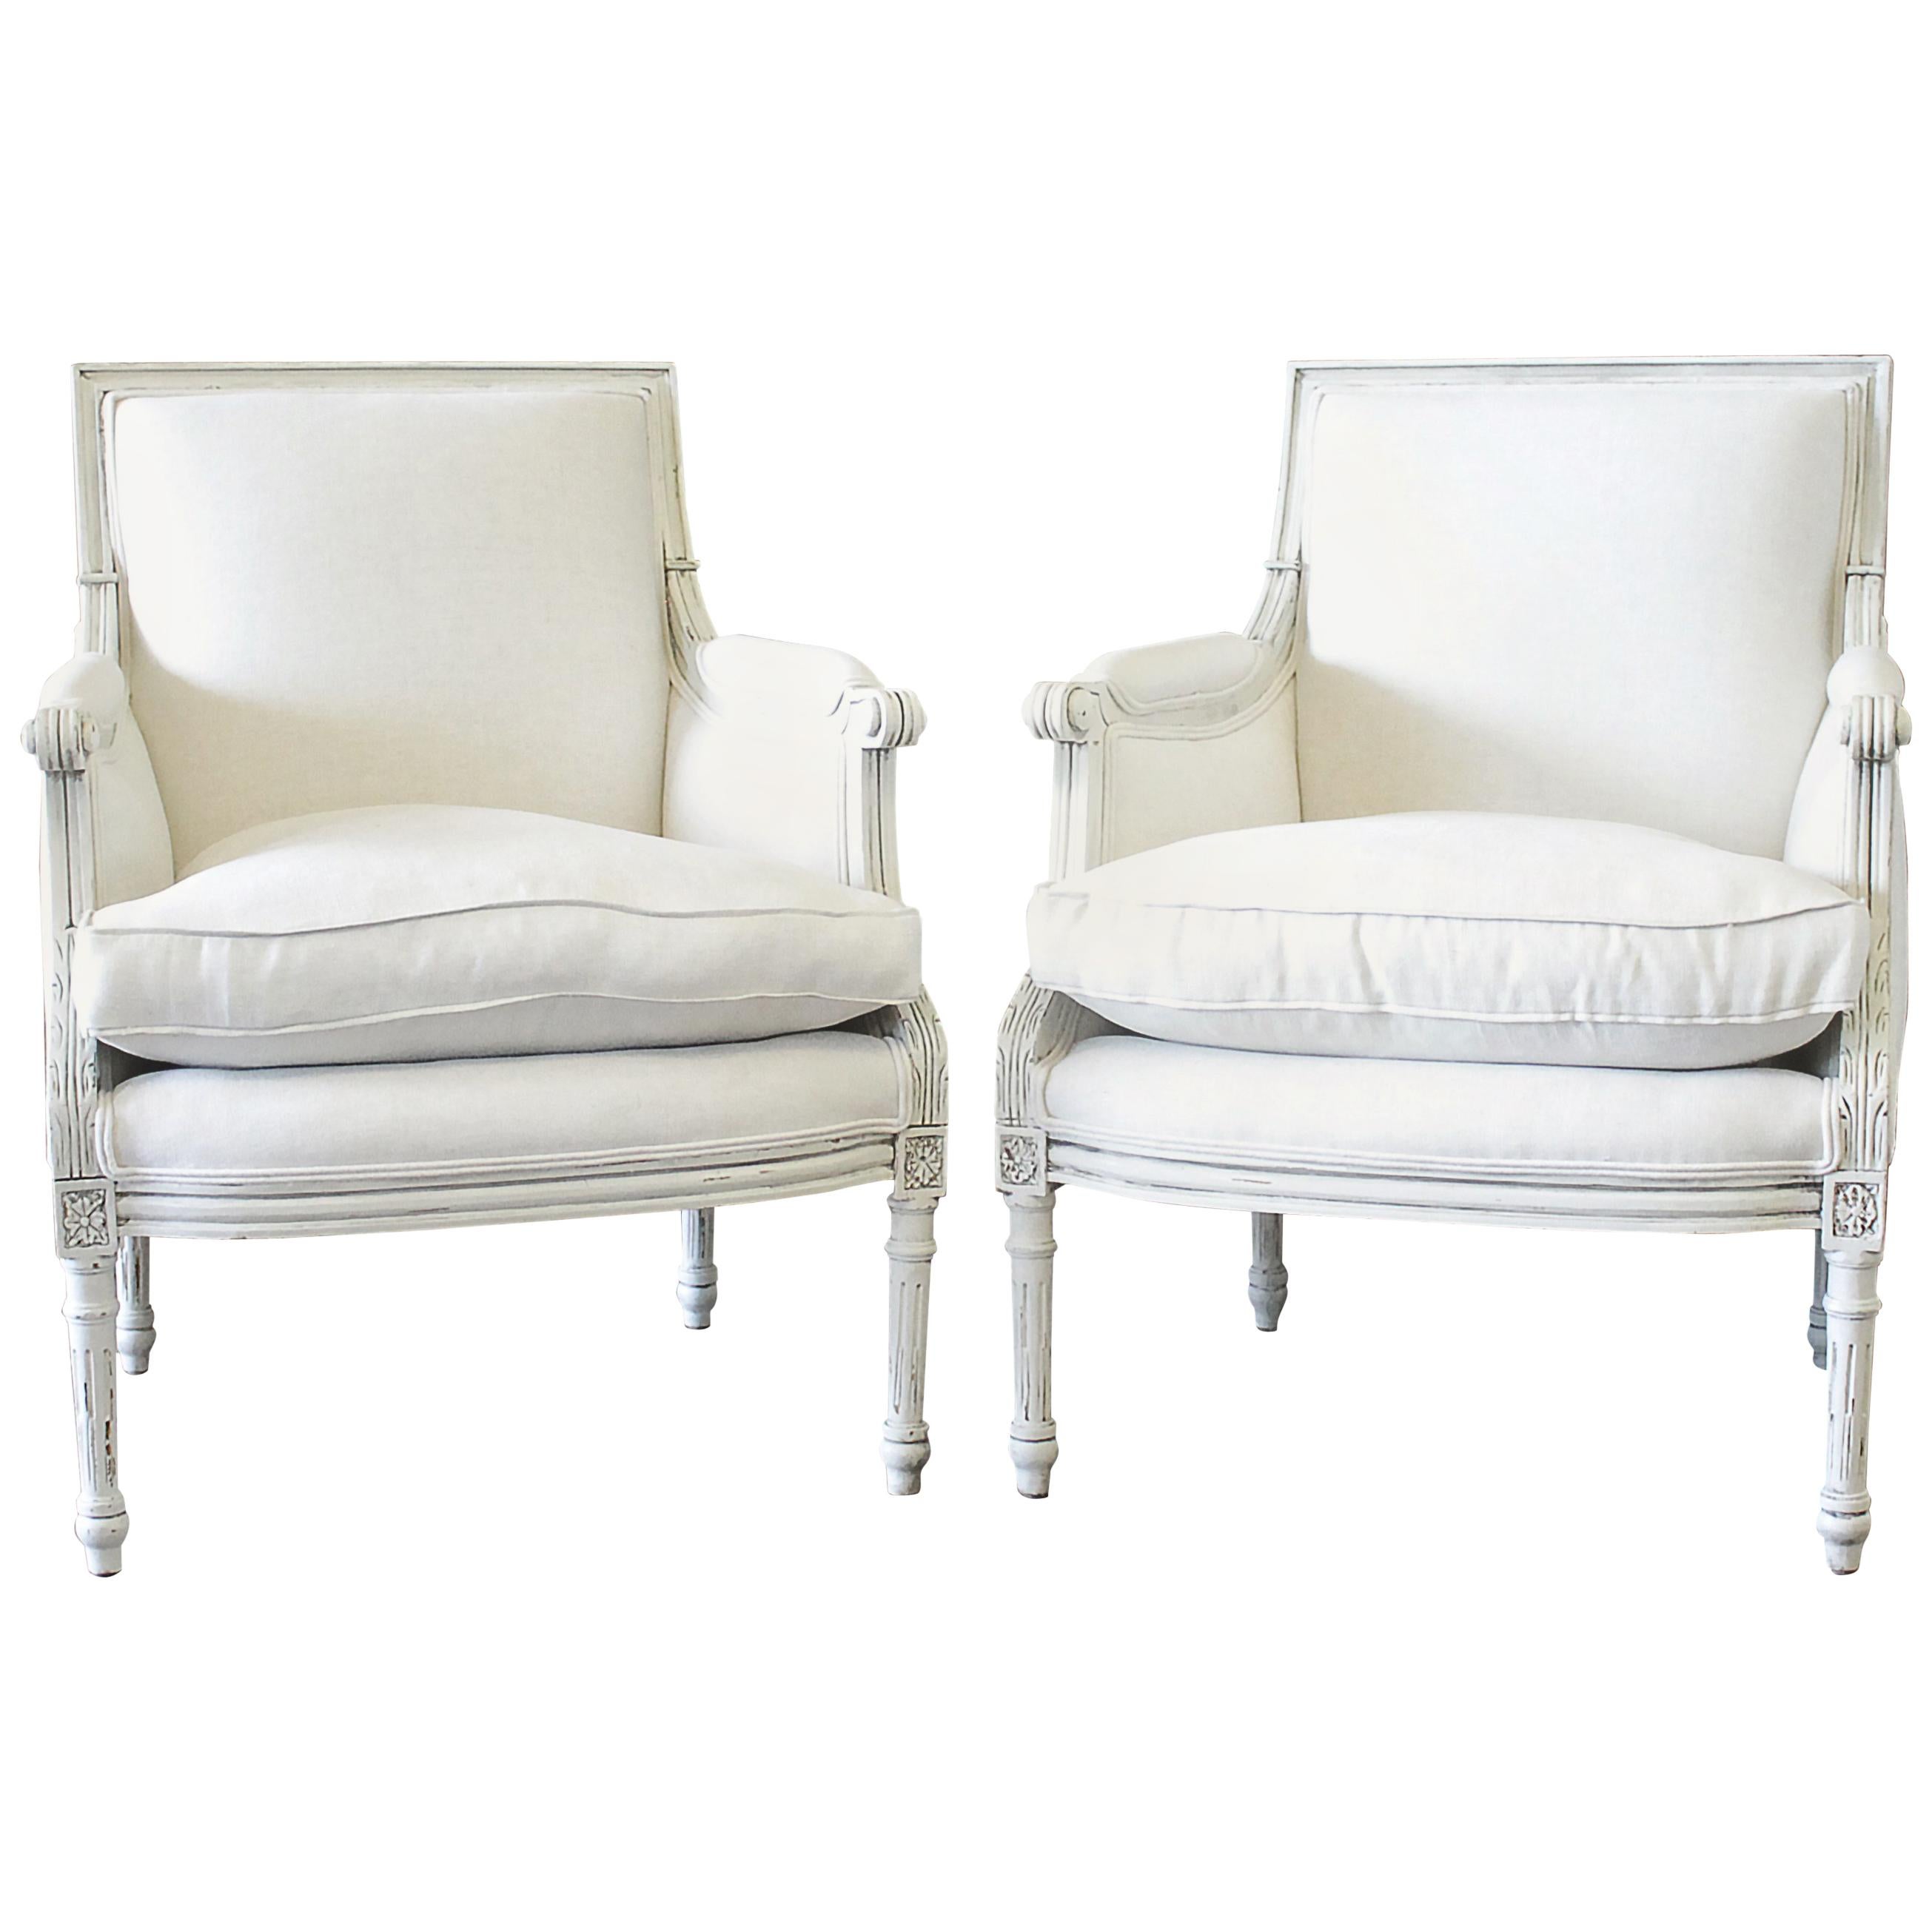 20th Century Louis XVI Style Painted Bergère Chairs in Natural Linen